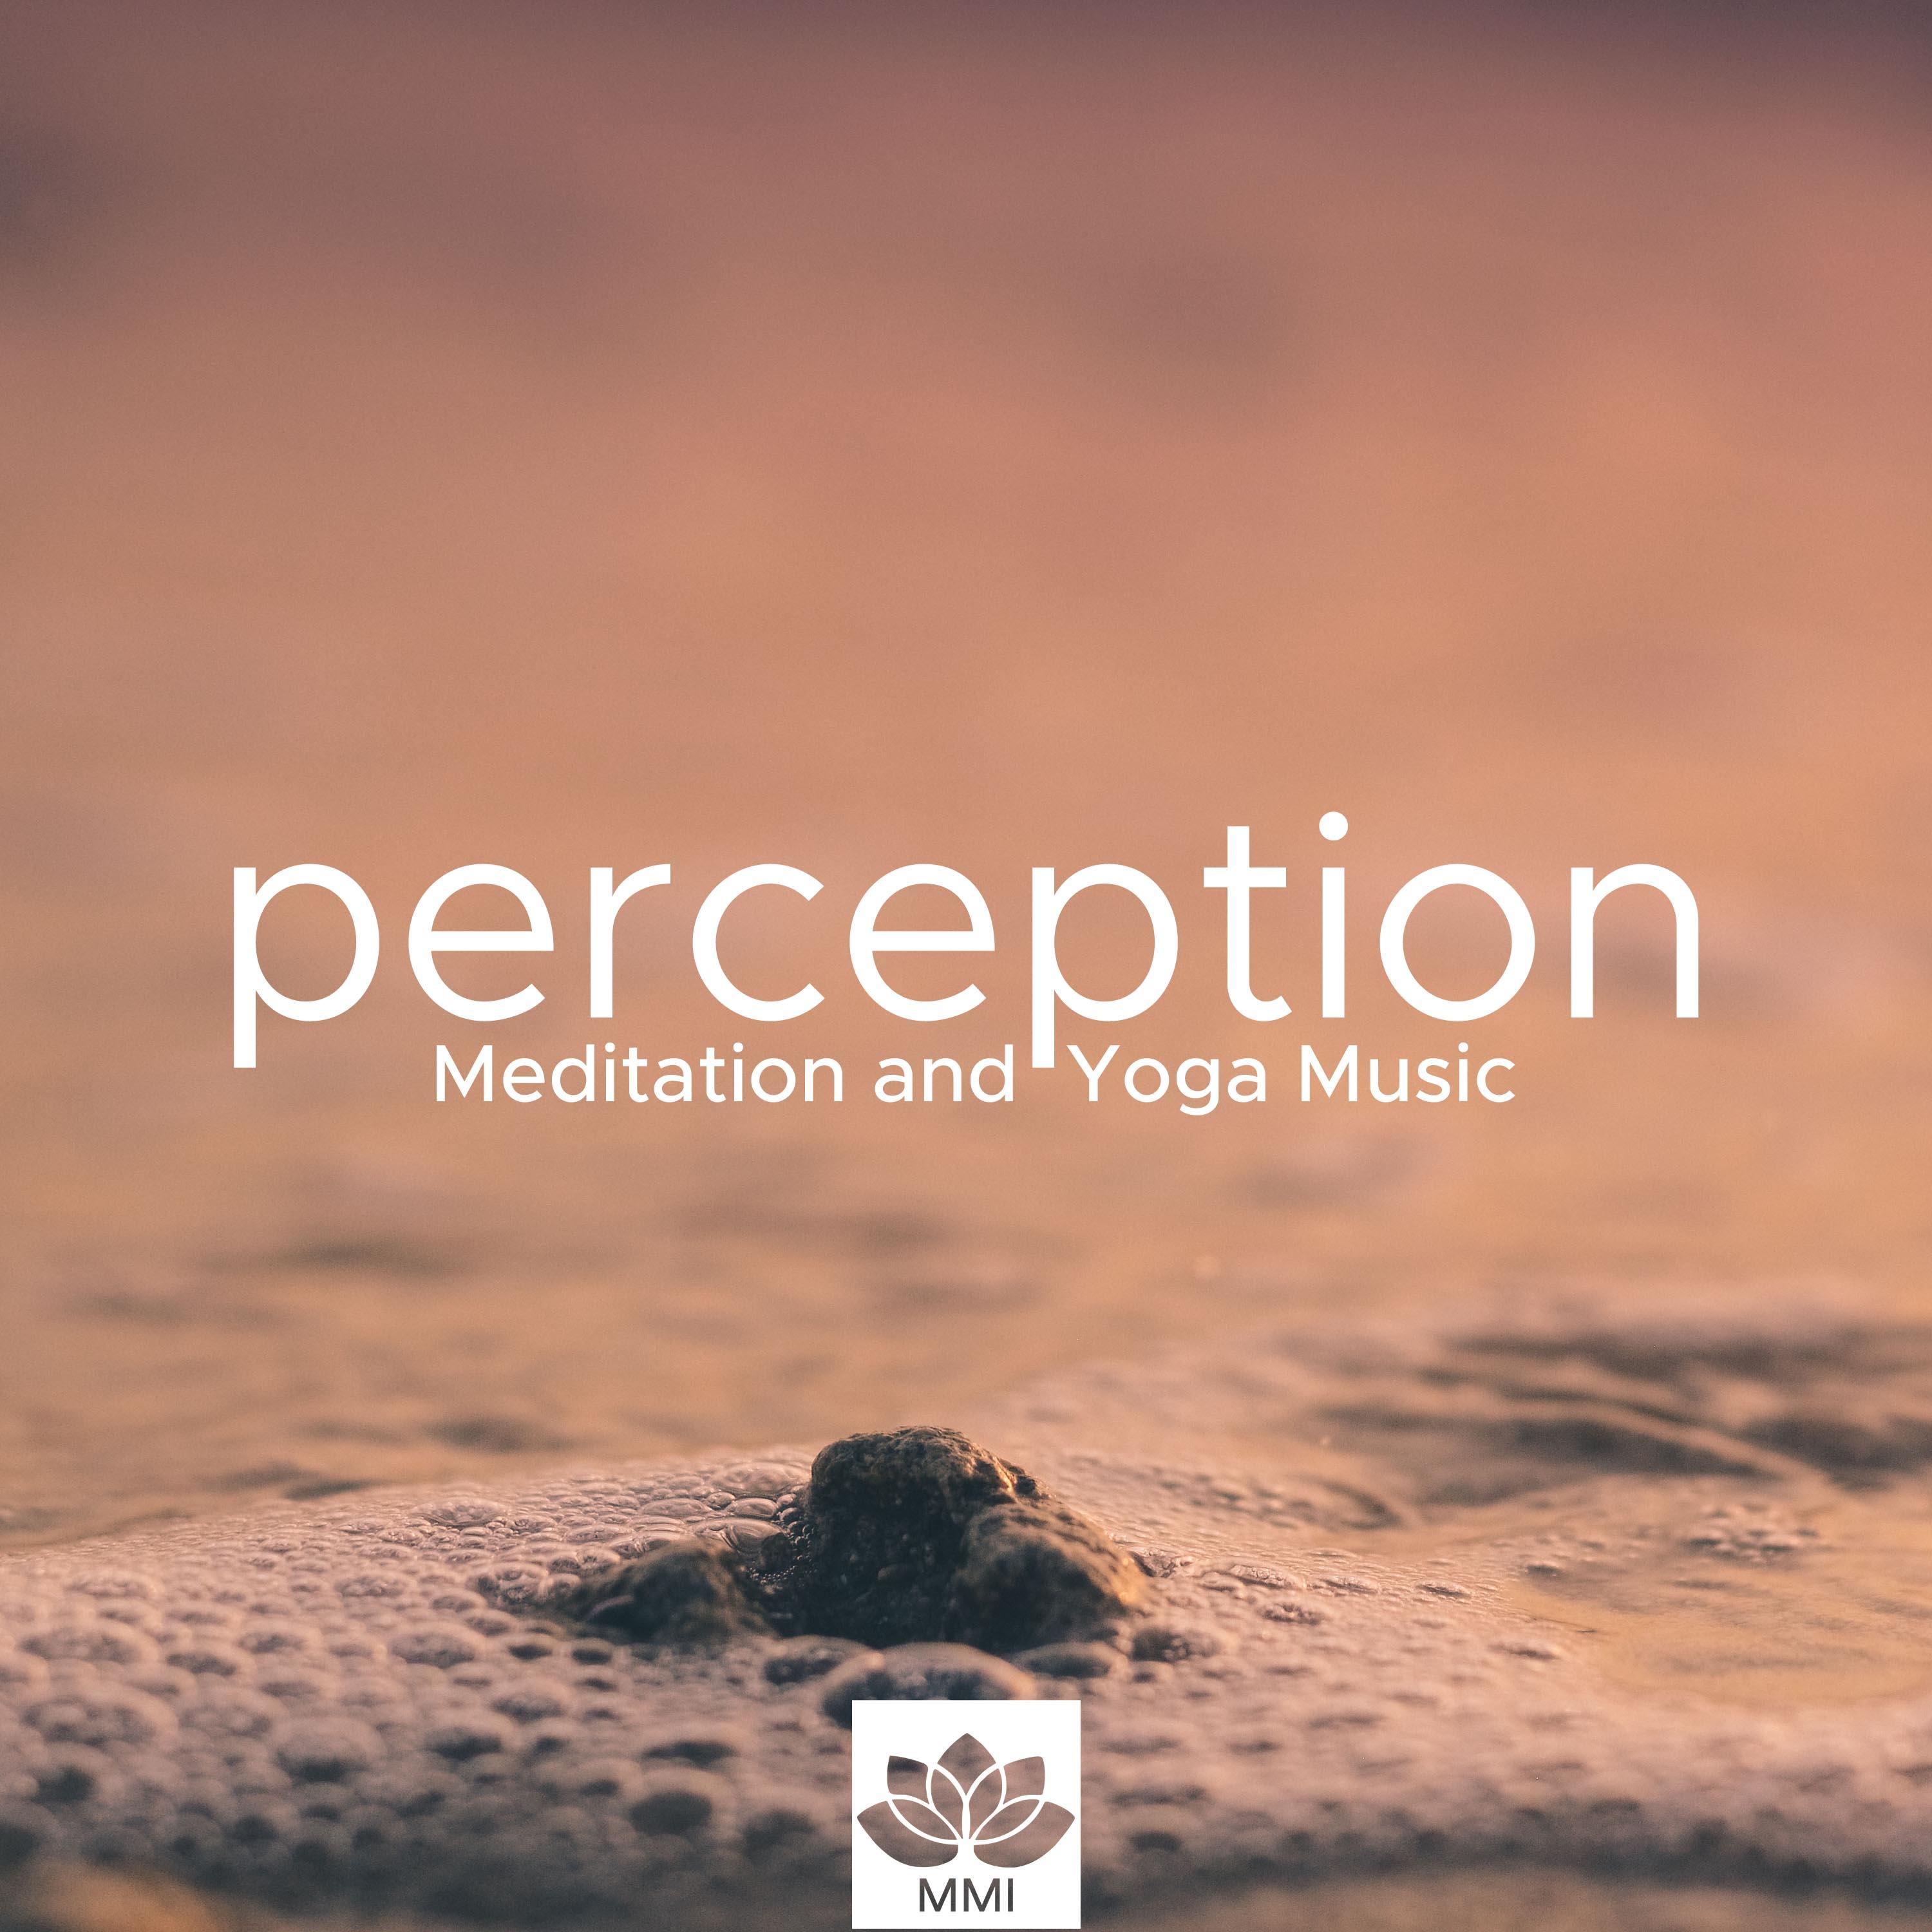 Perception - Meditation and Yoga Music, Asian Zen Music for Relaxation, Dreams, Sleep and Tranquility